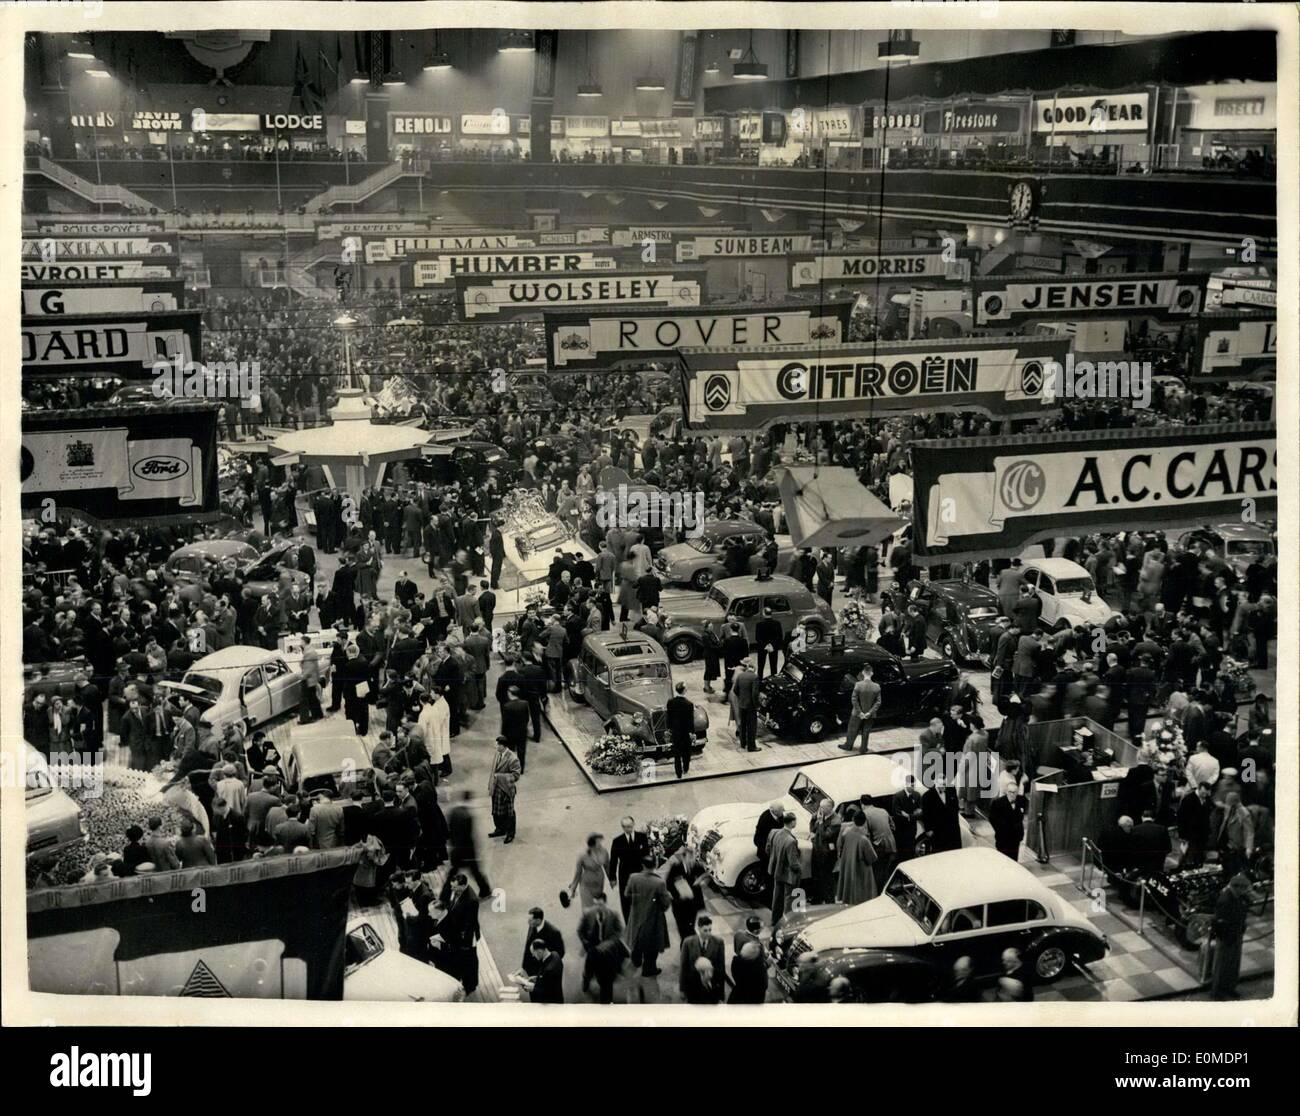 Oct. 20, 1954 - International Motor Show at Earl's Court. Photo shows general view showing a section of the International Motor Stock Photo